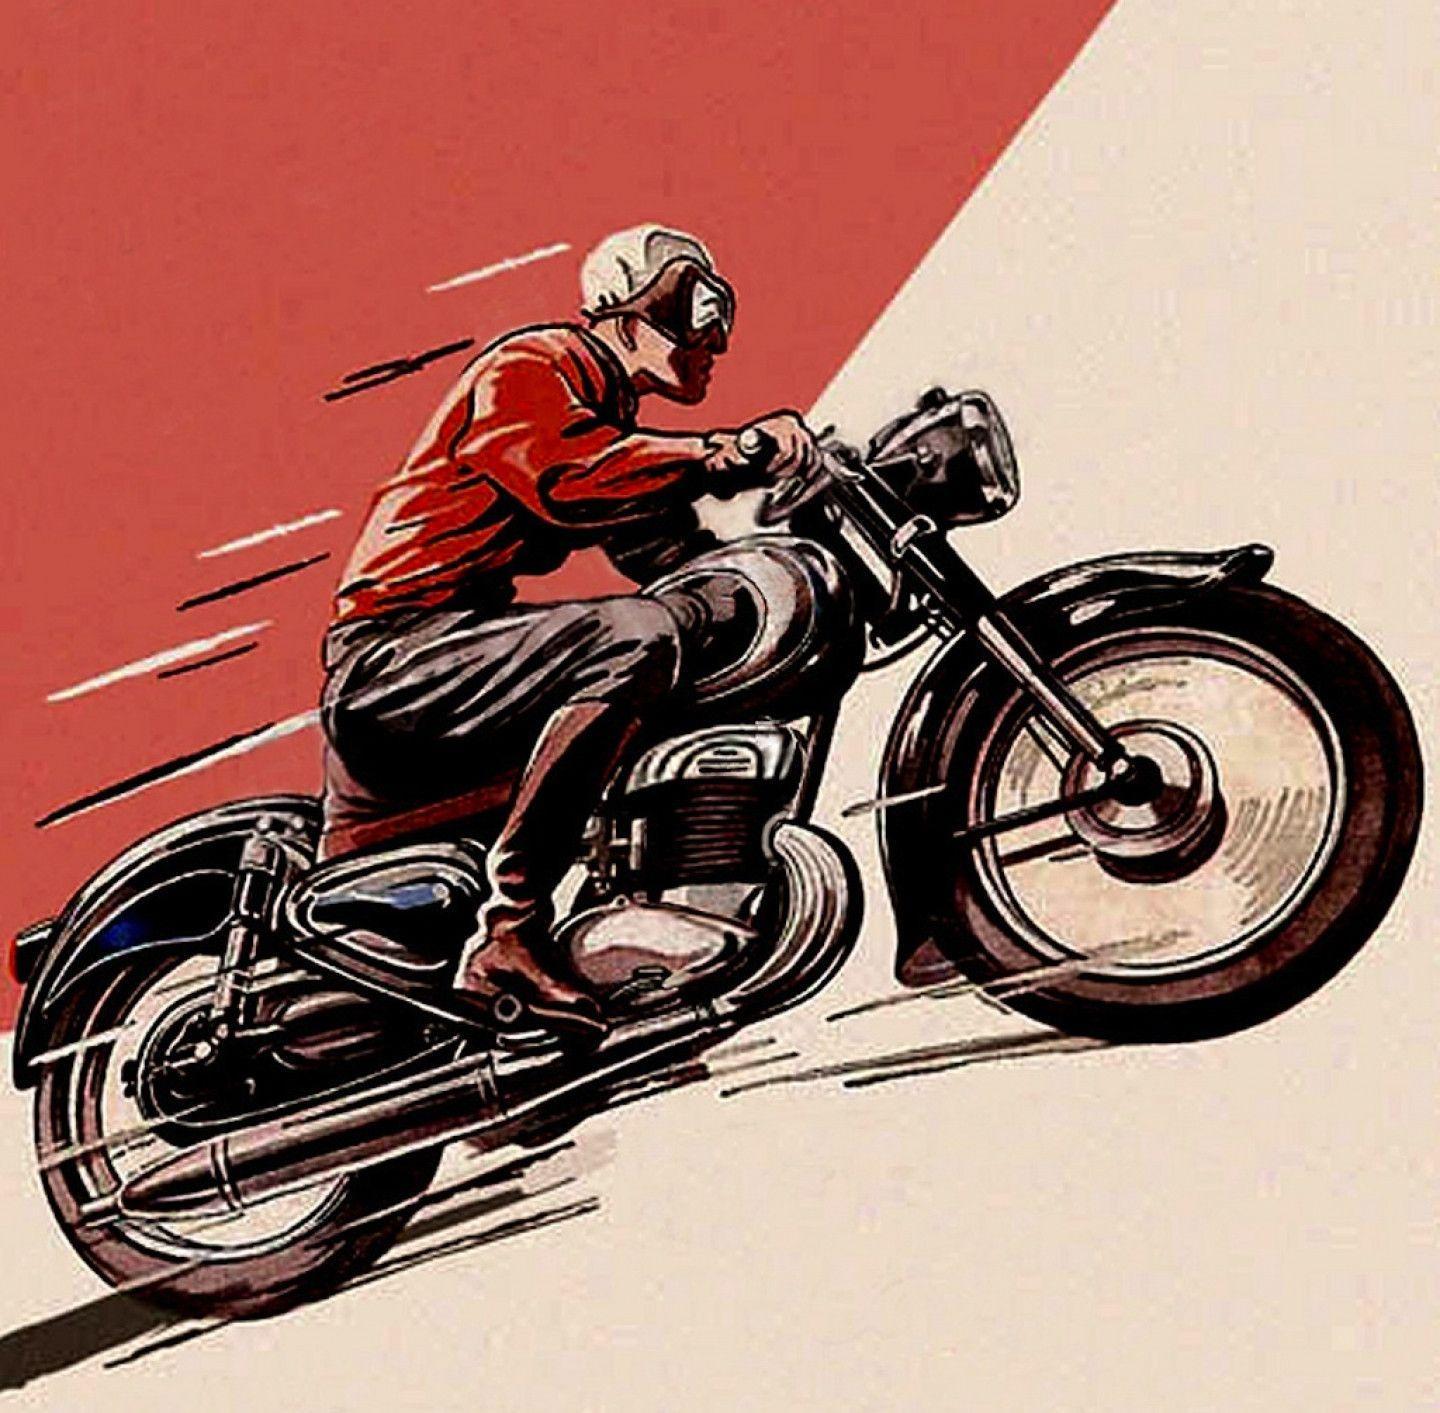 Vintage Motorcycle Posters And Sketches Wallpaper